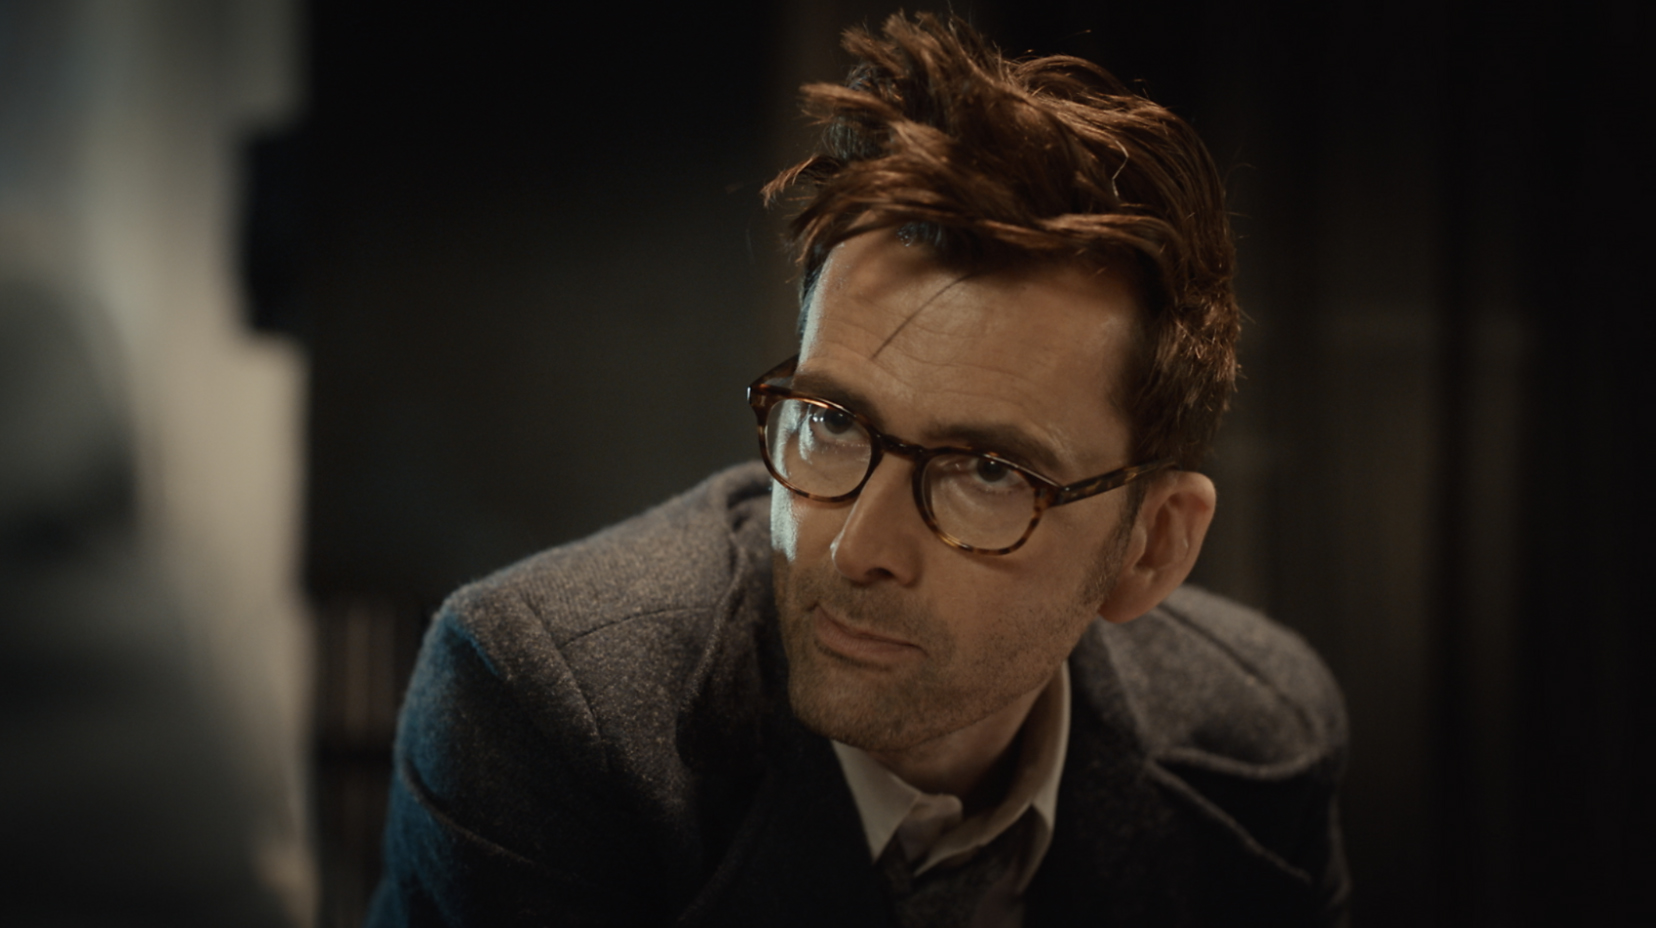 The Doctor Who 60th Anniversary teaser trailer pulls on our dual heart strings